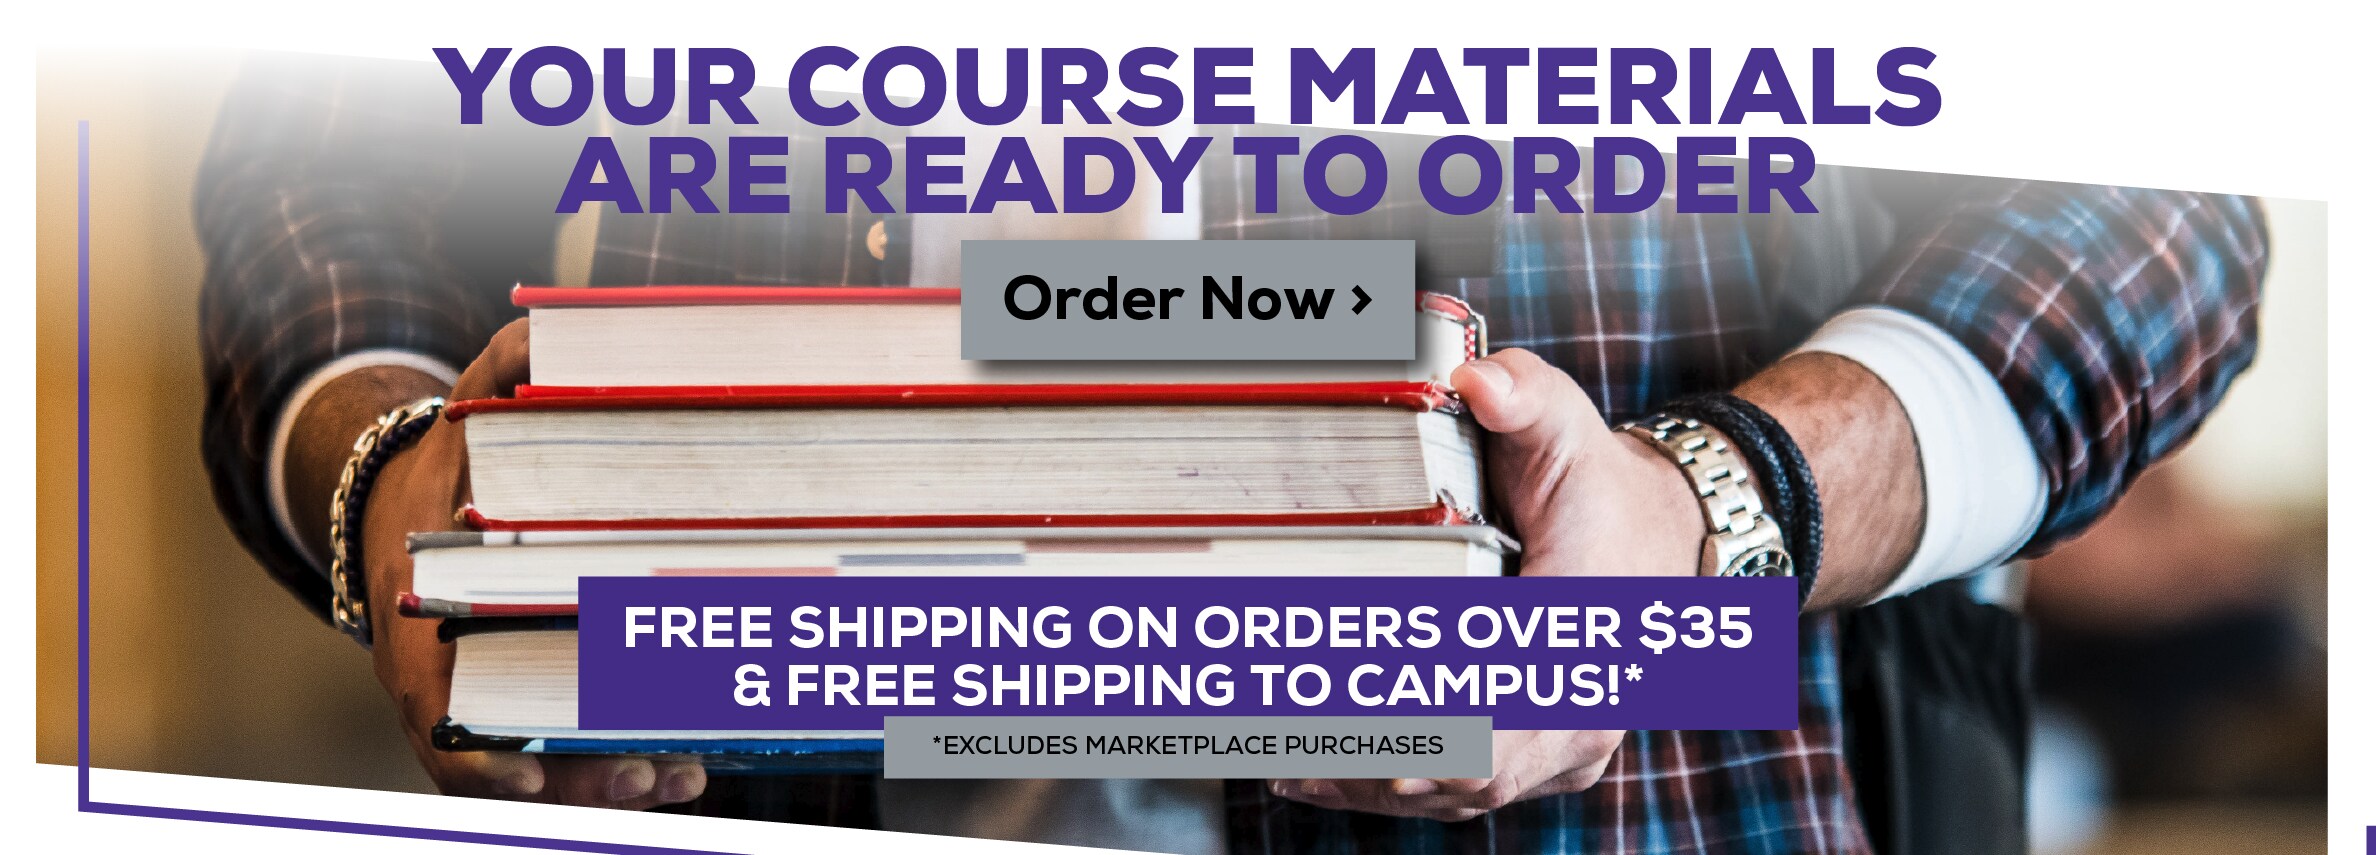 Your Course Materials are Ready to Order. Order Now. Free shipping on orders over $35 & free shipping to the campus store! *Excludes marketplace purchases.